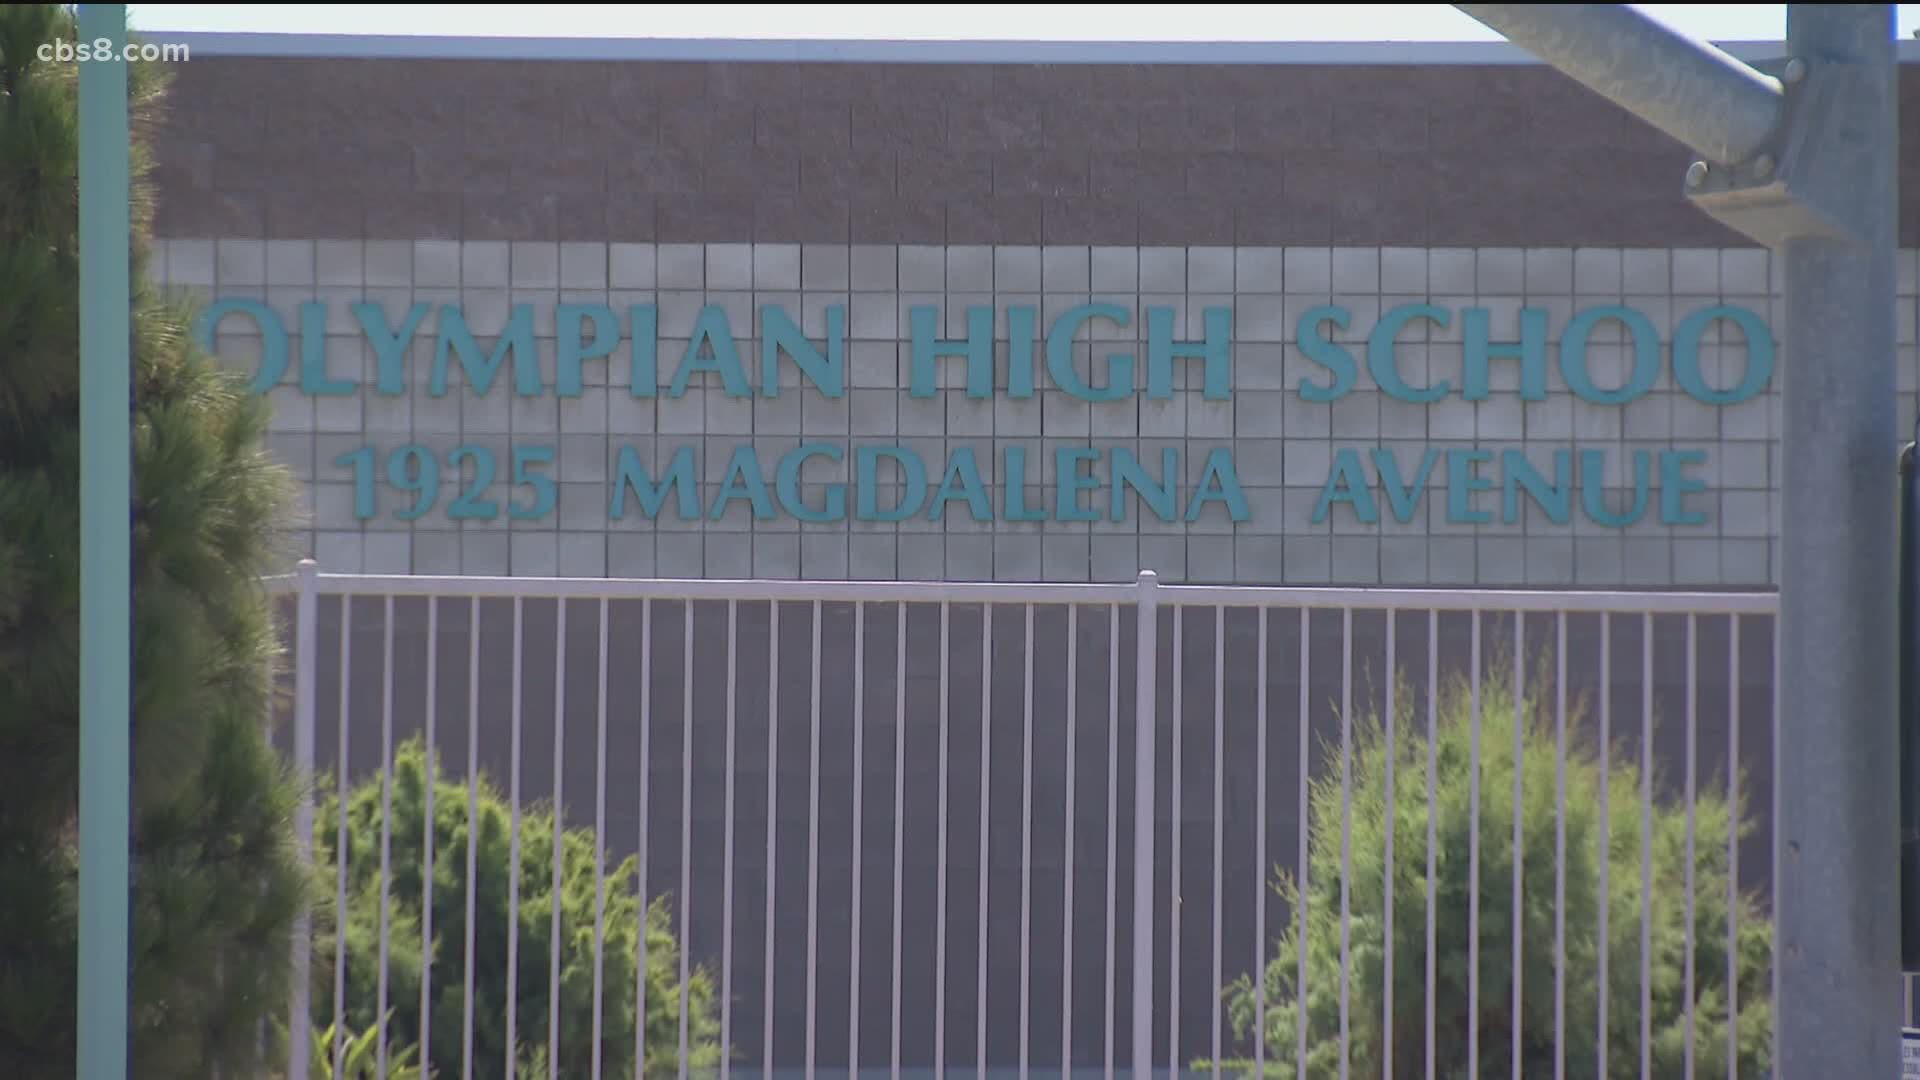 A student from Olympian High School say pornography has popped up multiple times during different classes.